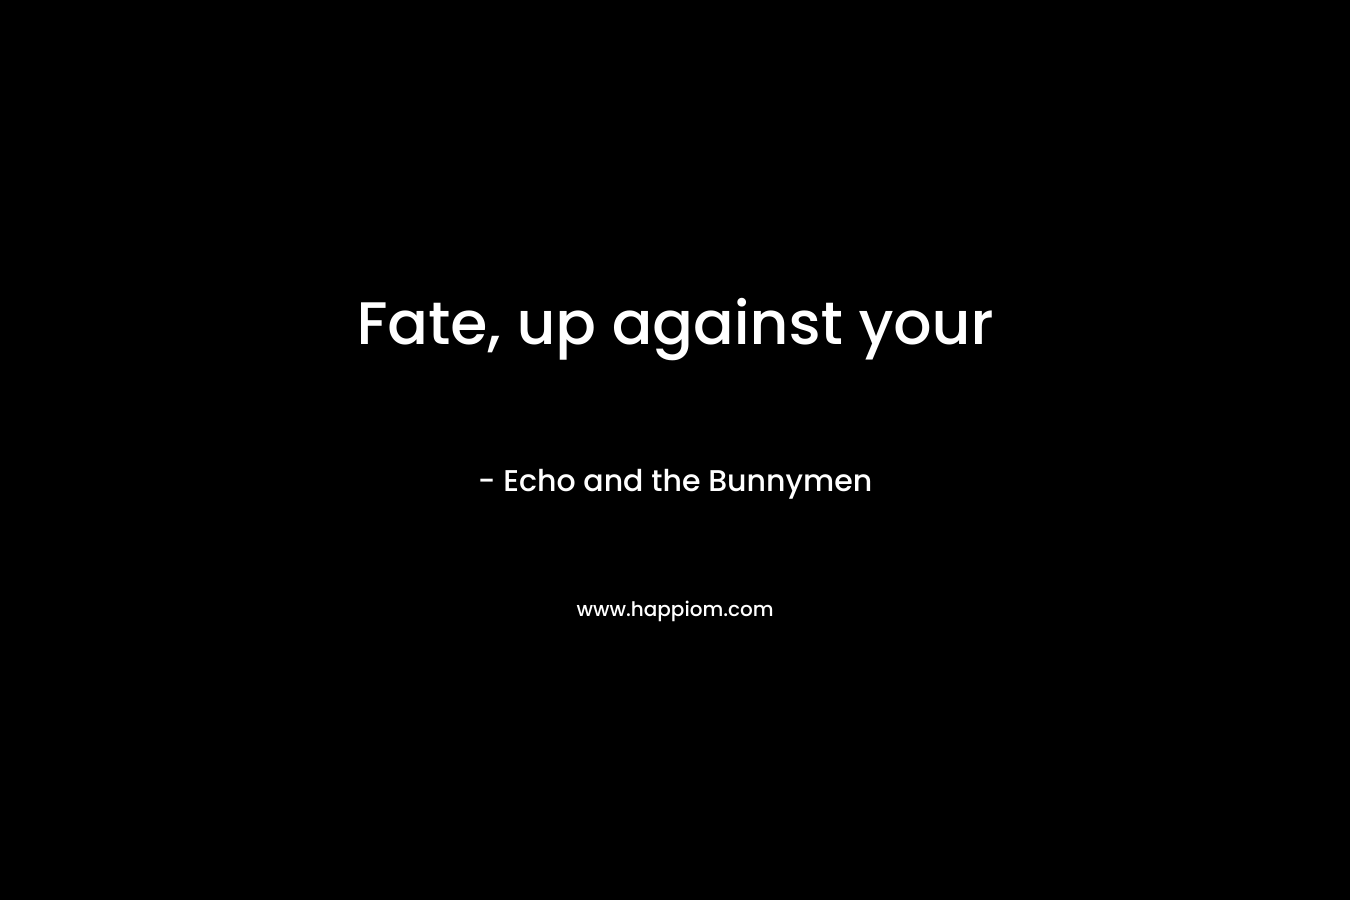 Fate, up against your – Echo and the Bunnymen